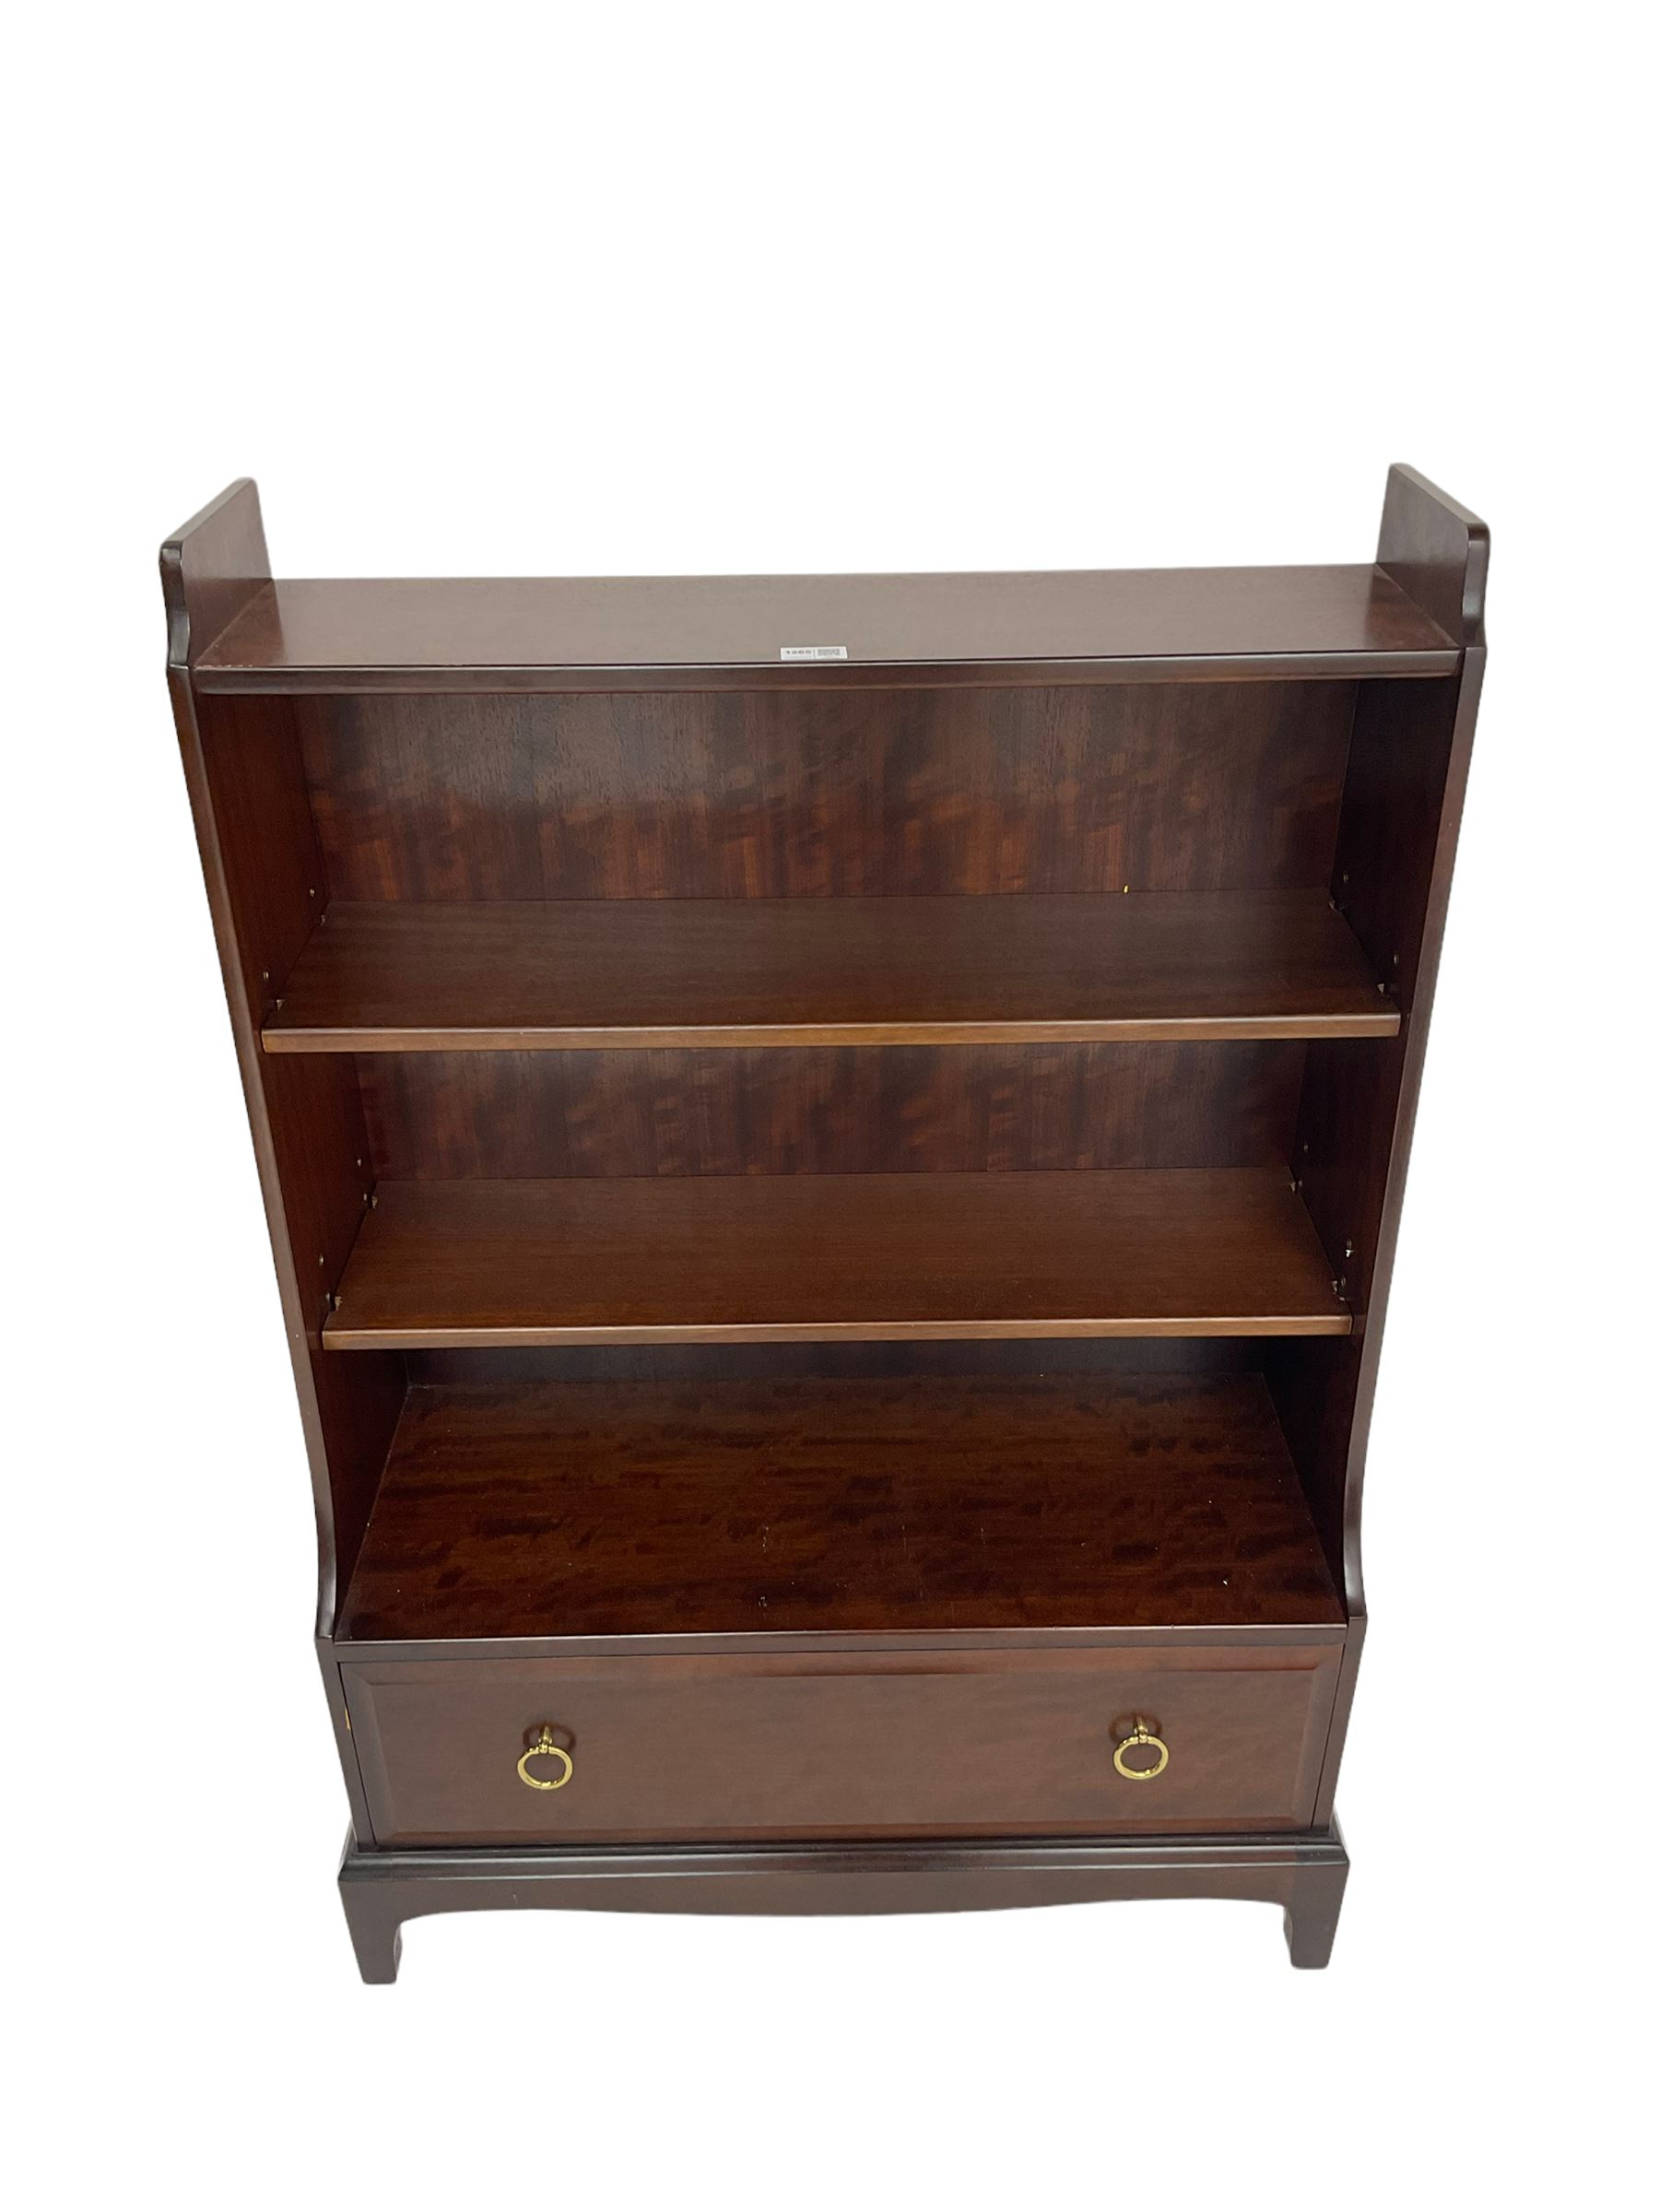 Stag Minstrel - mahogany open bookcase with drawer